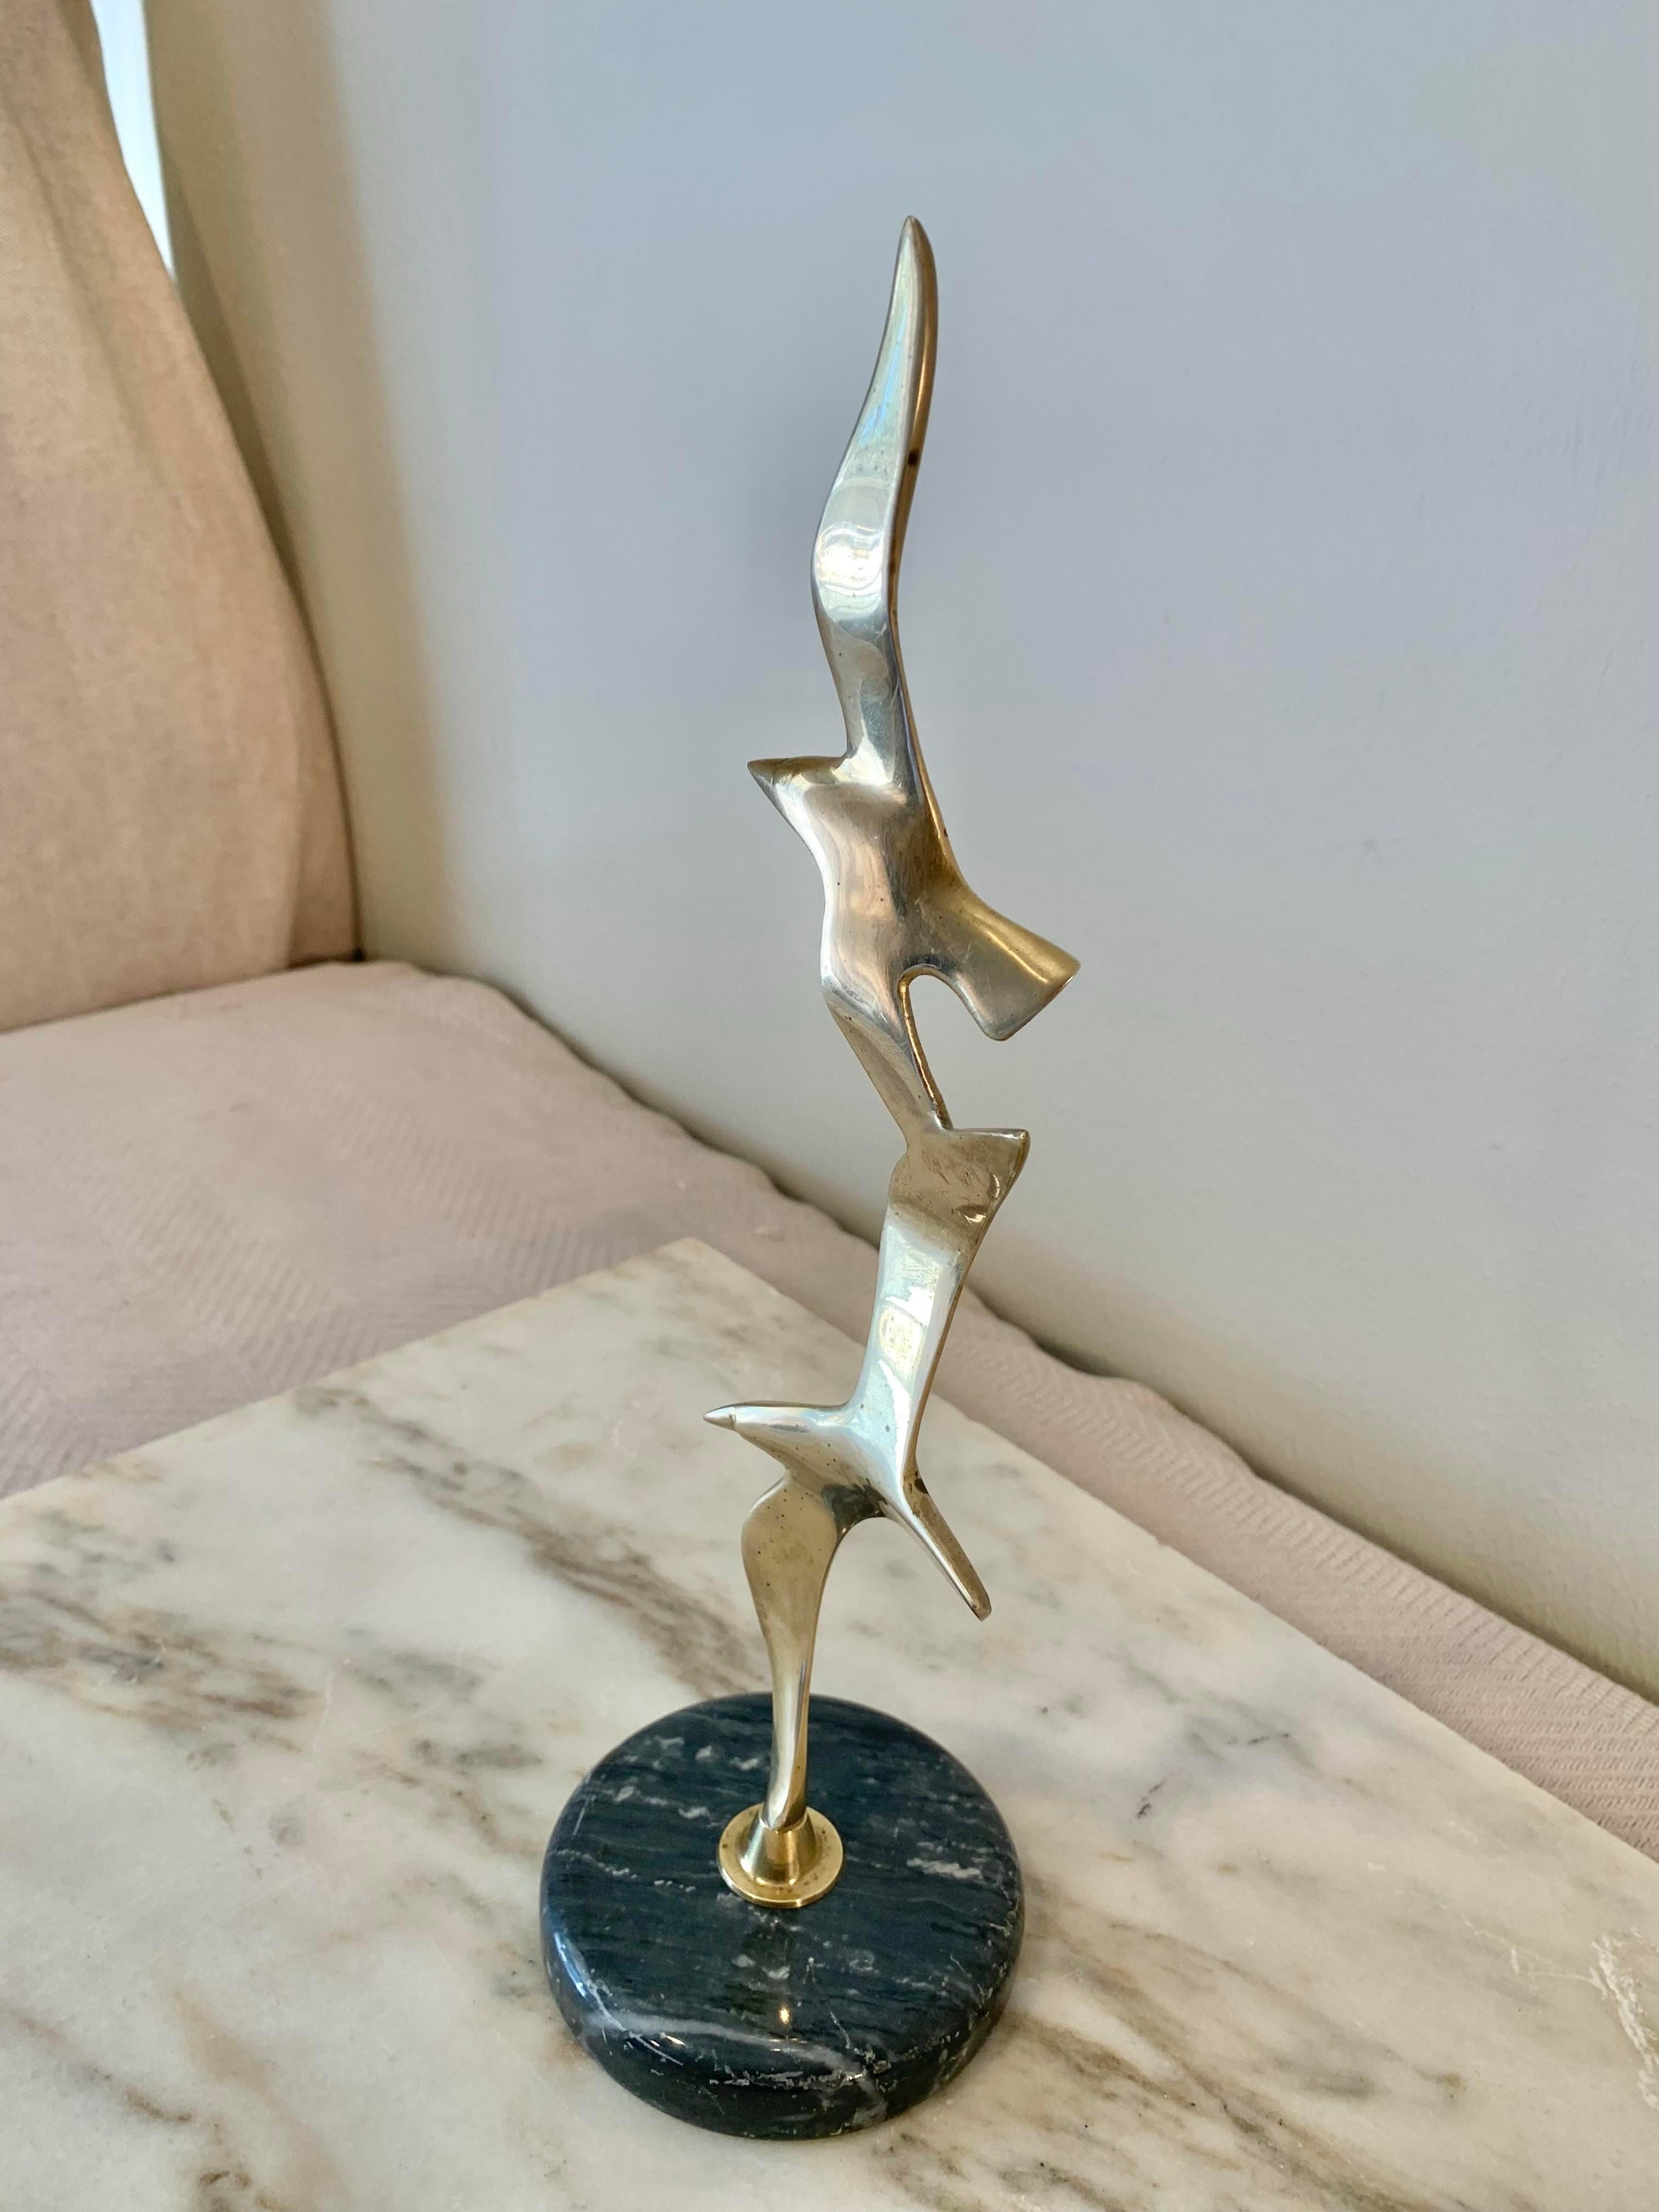 North American Mid Century Modern Brass and Marble Seagulls in Flight Sculpture